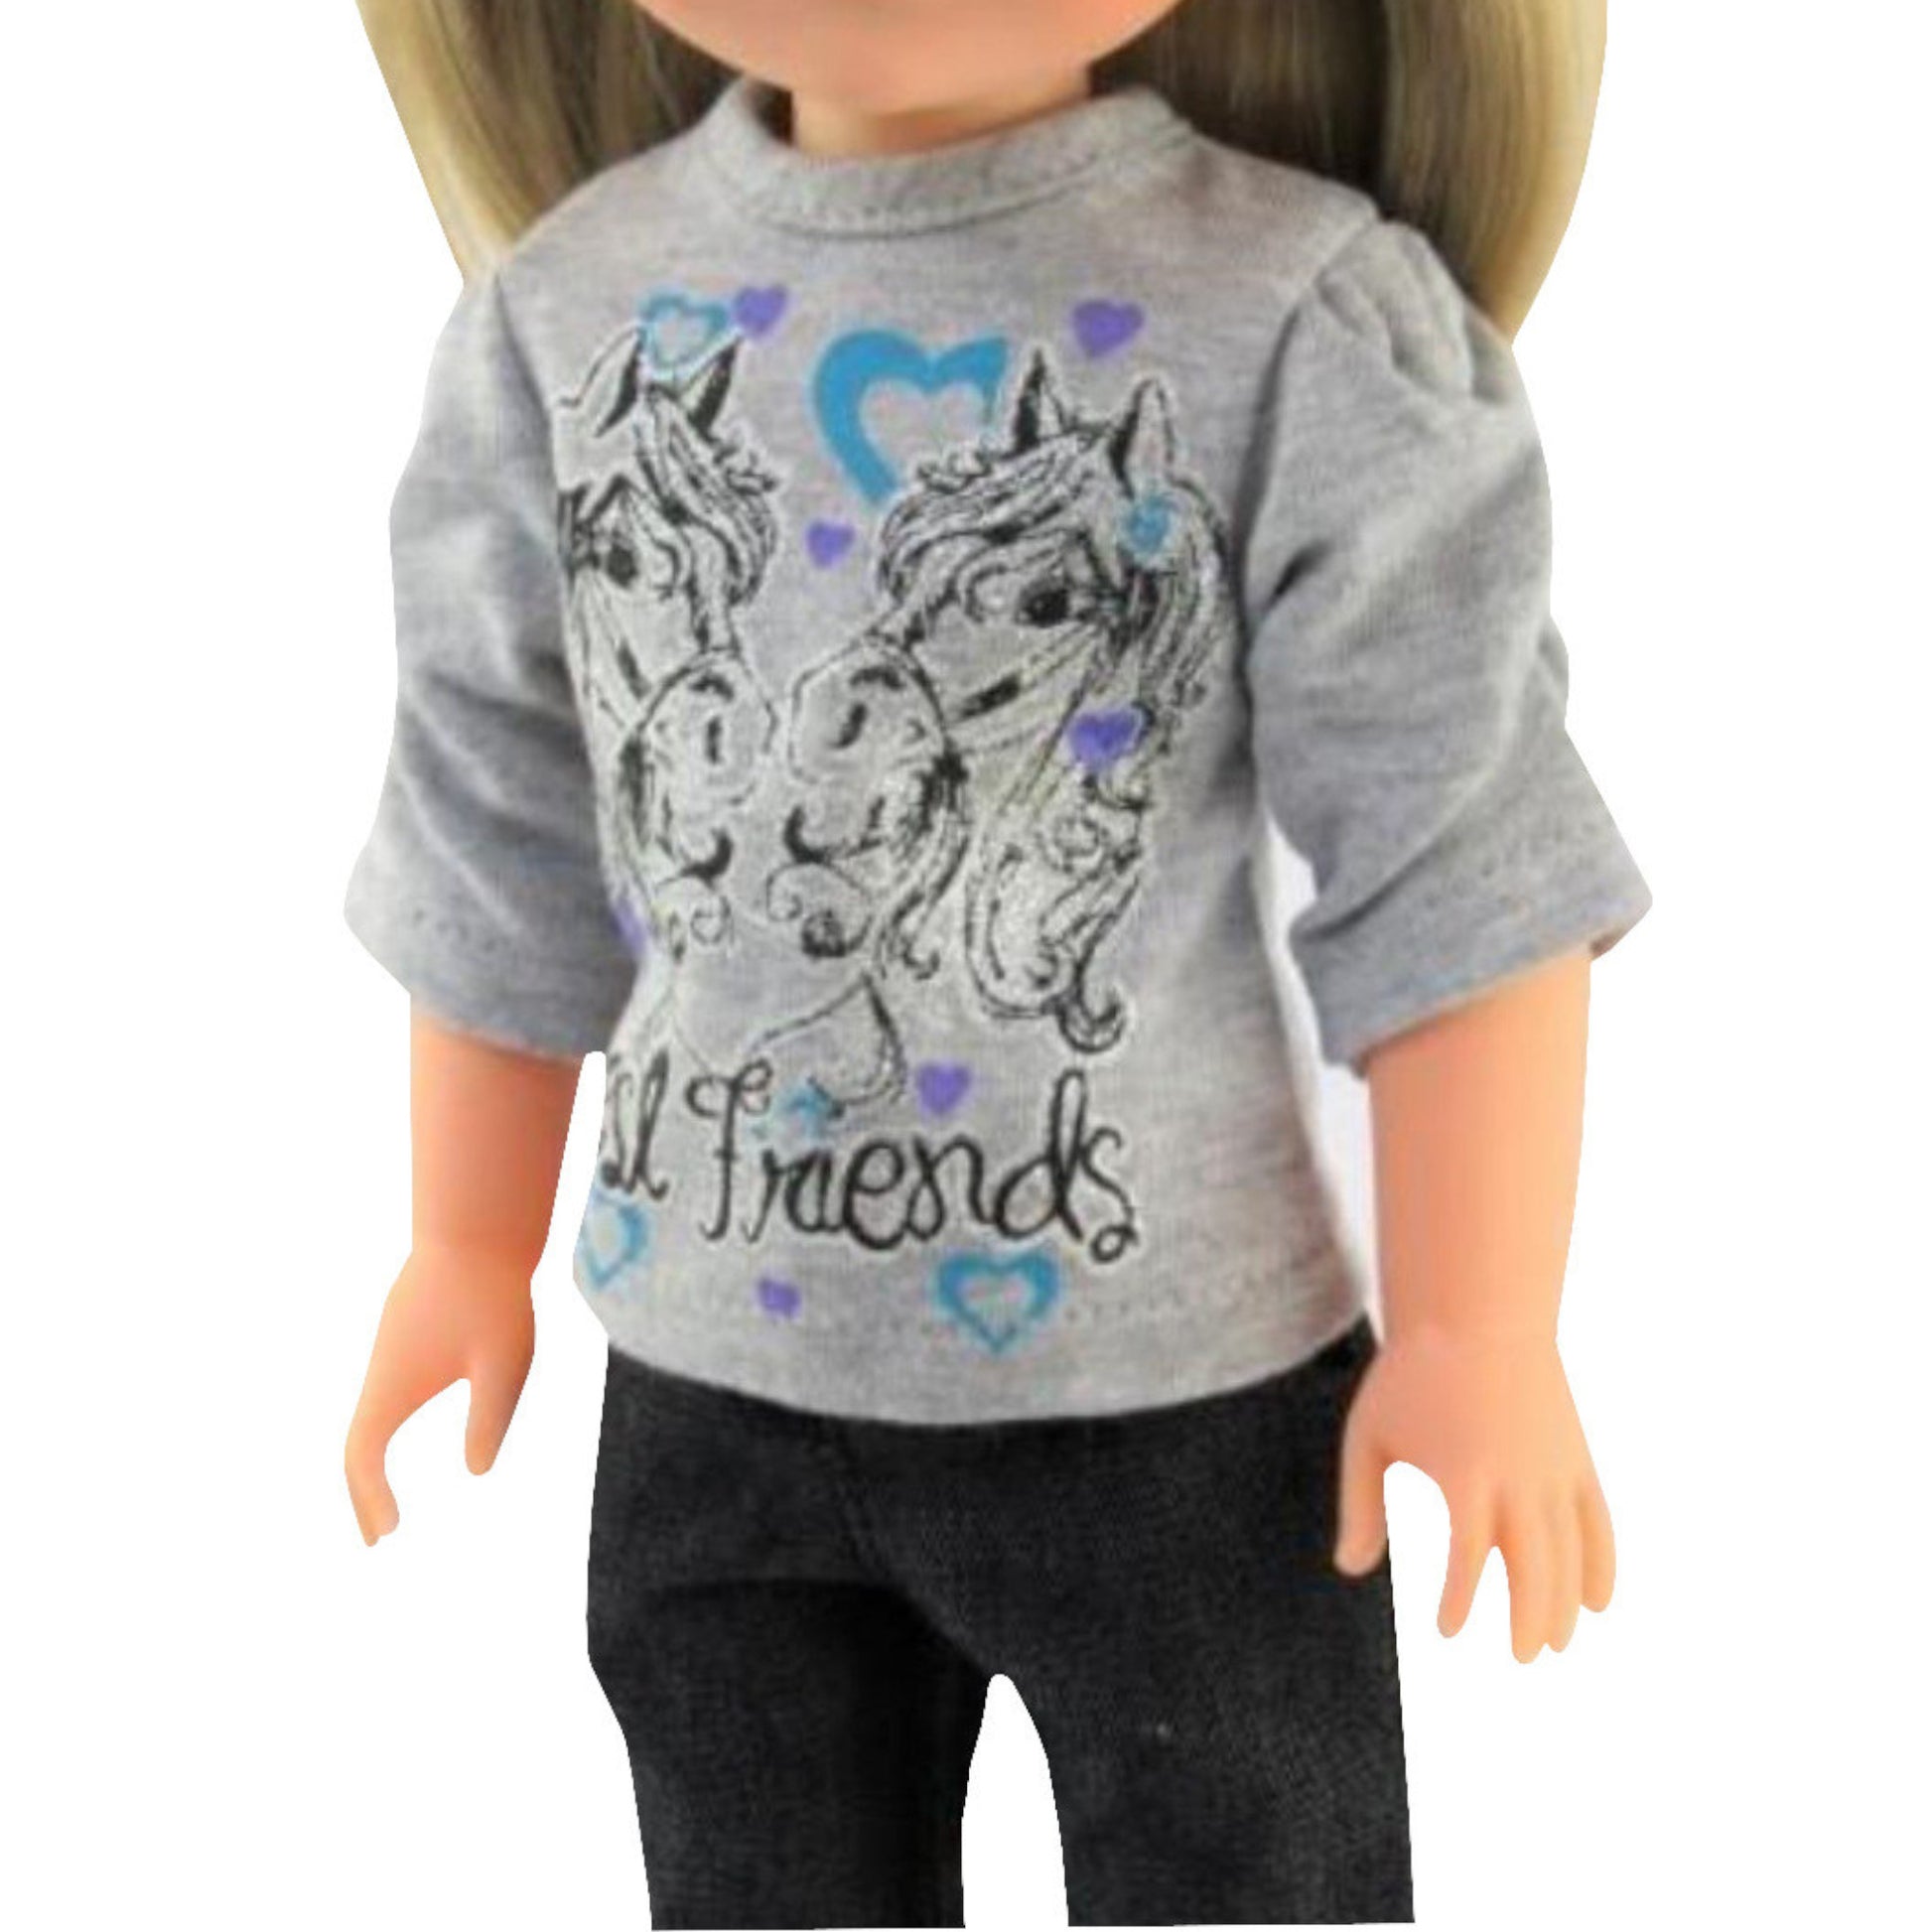 Best Friends Horse Pants Set for 14 1/2-inch dolls with doll Up Close